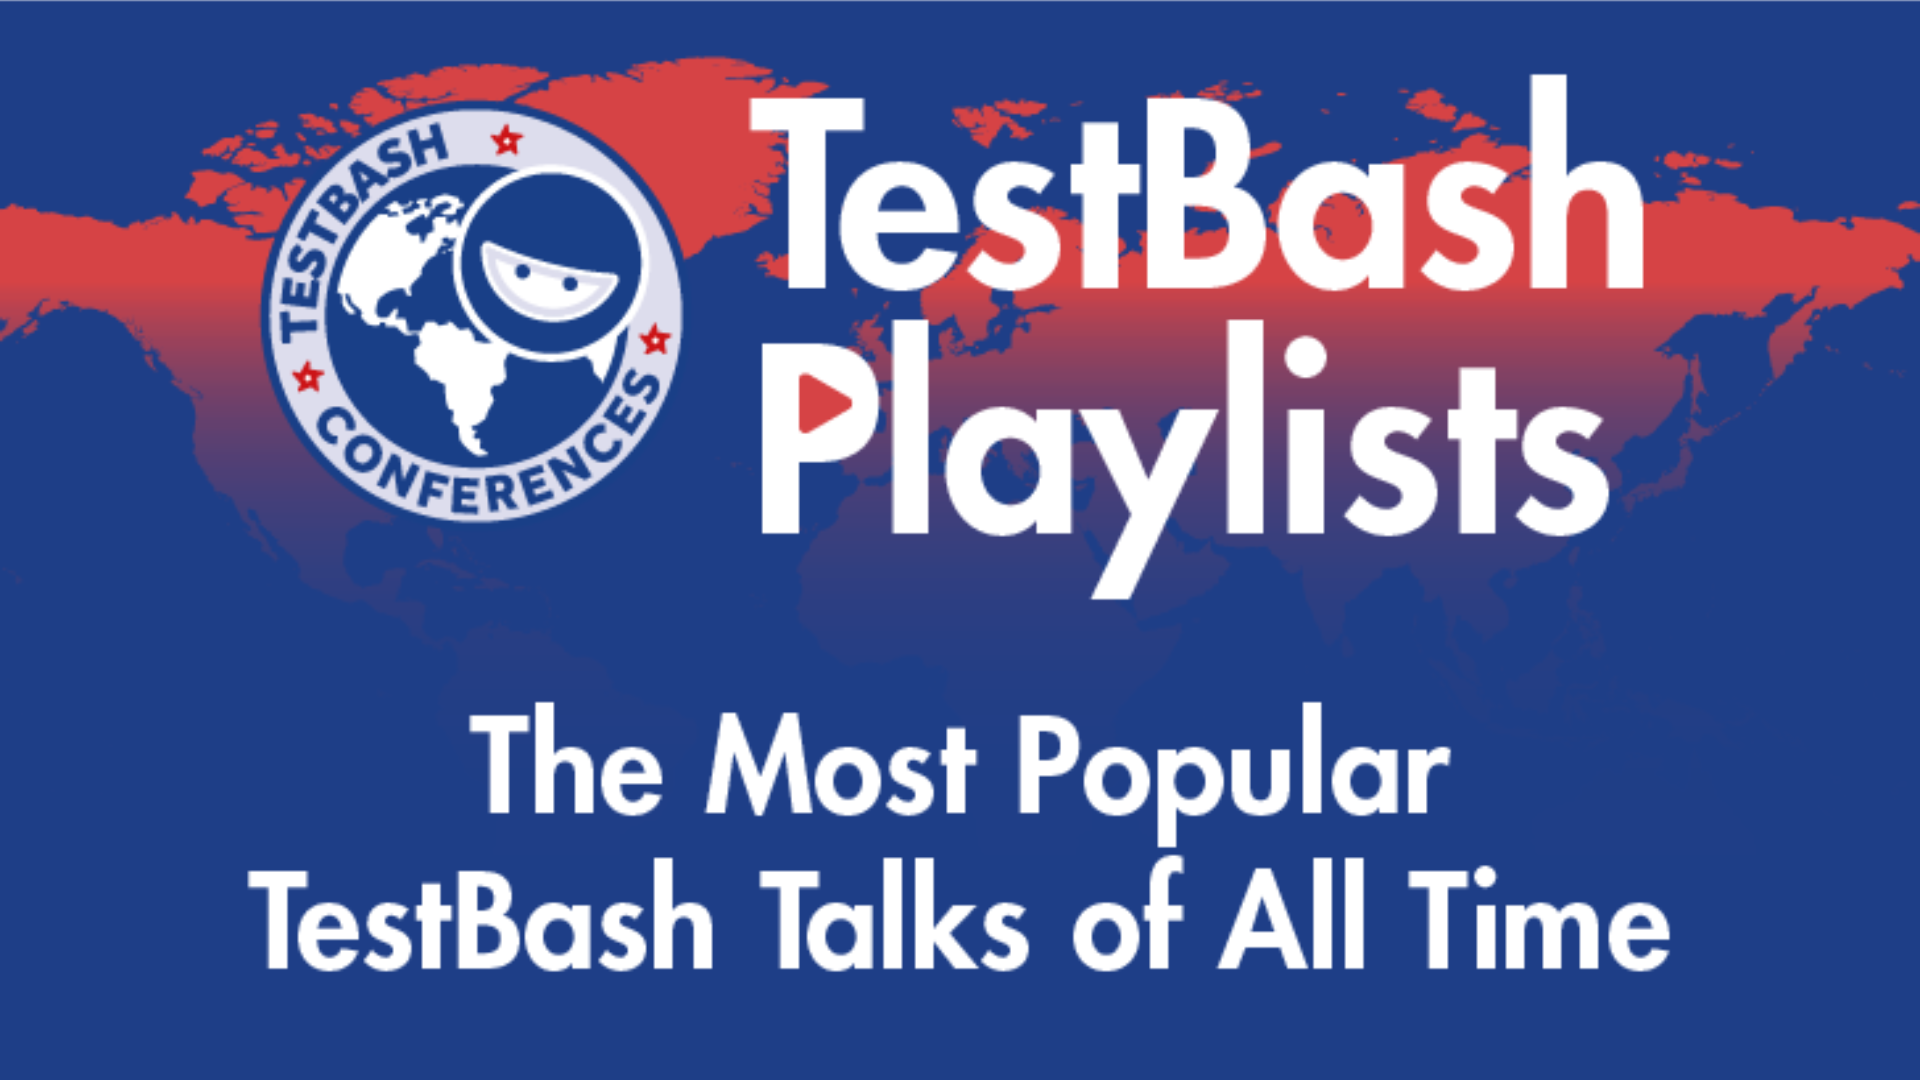 TestBash Playlists - The Most Popular TestBash Talks of All Time